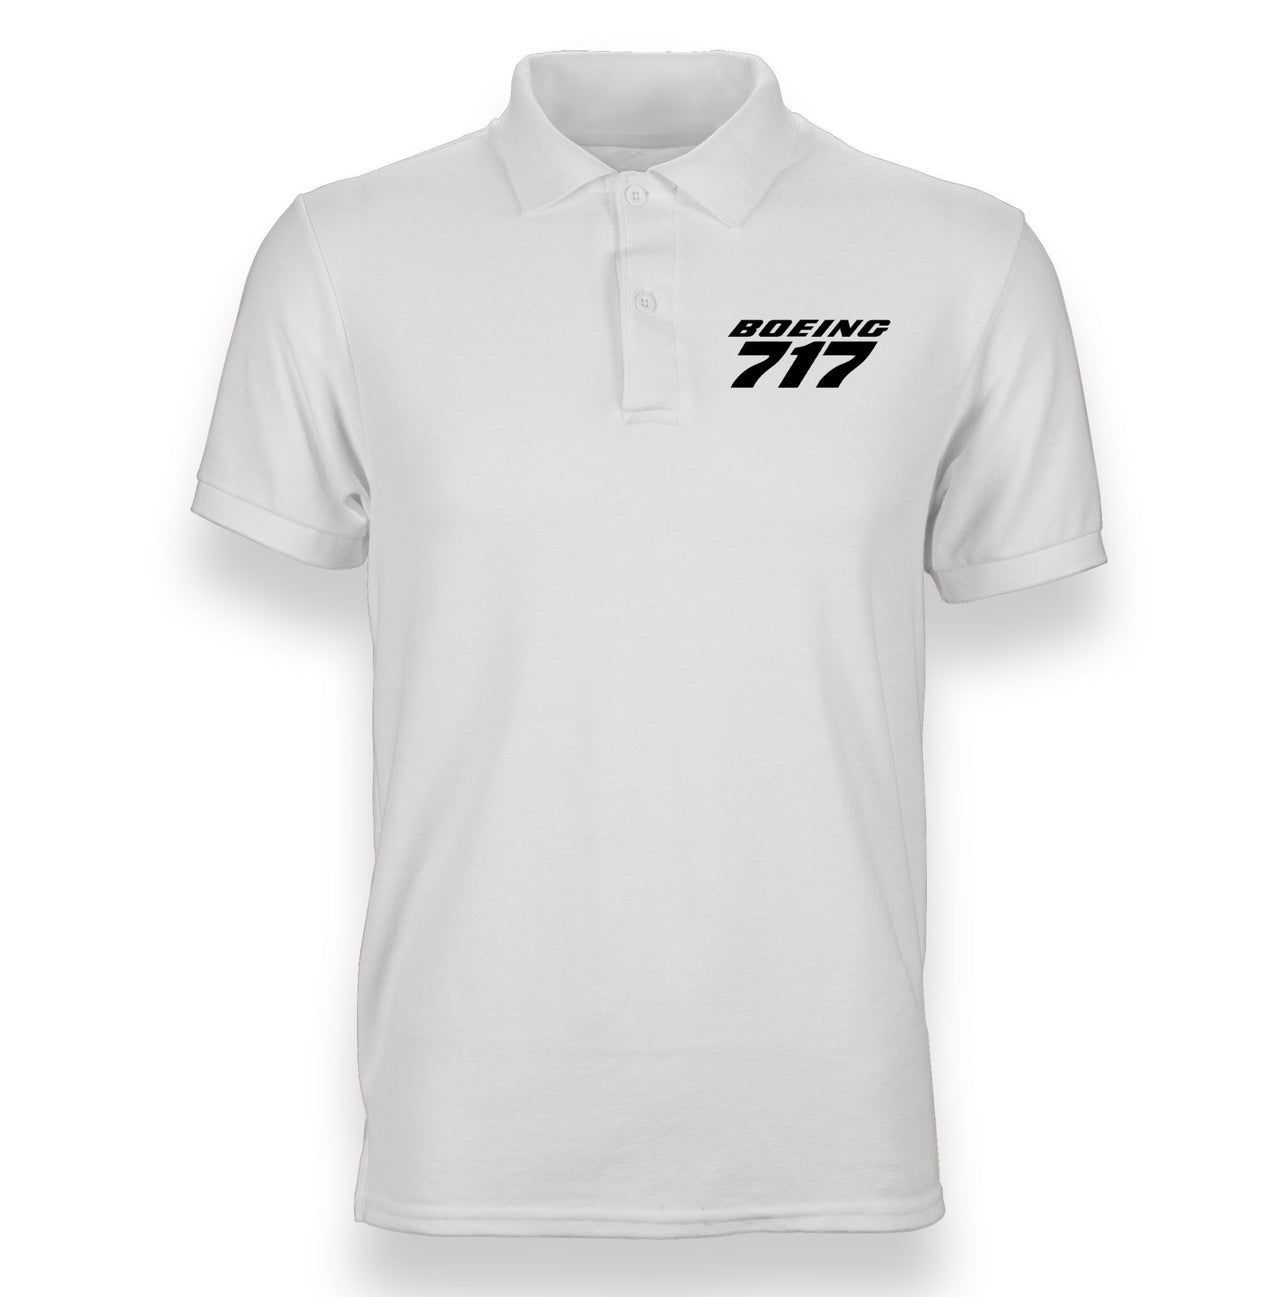 Boeing 717 & Text Designed "WOMEN" Polo T-Shirts